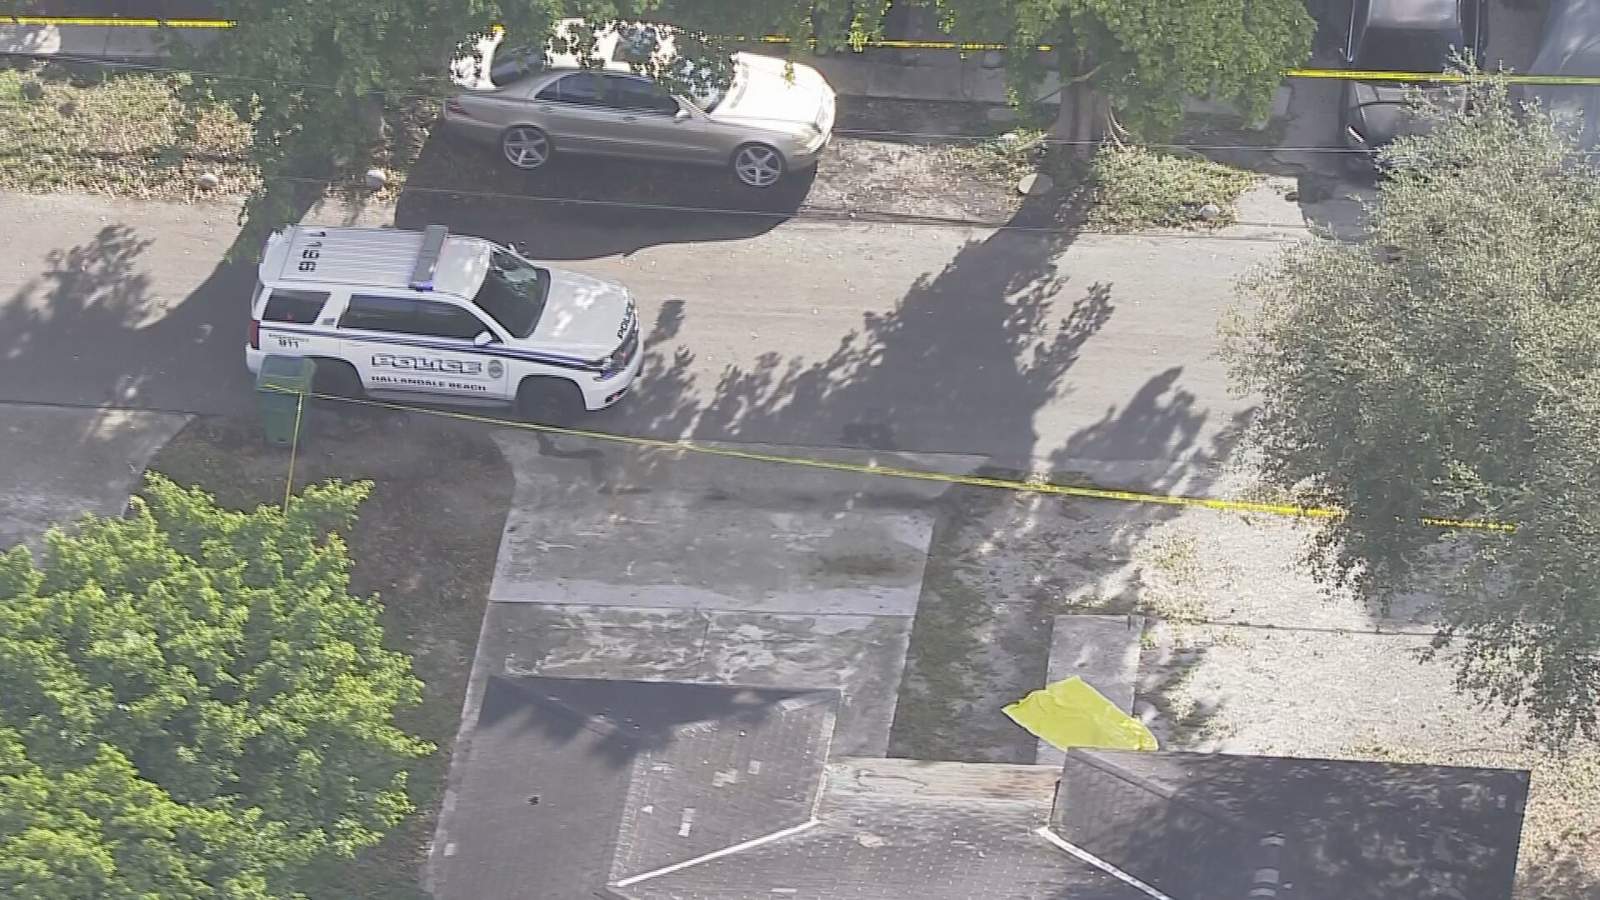 Sky 10 was over the scene of a body found in Hallandale Beach on Friday morning.